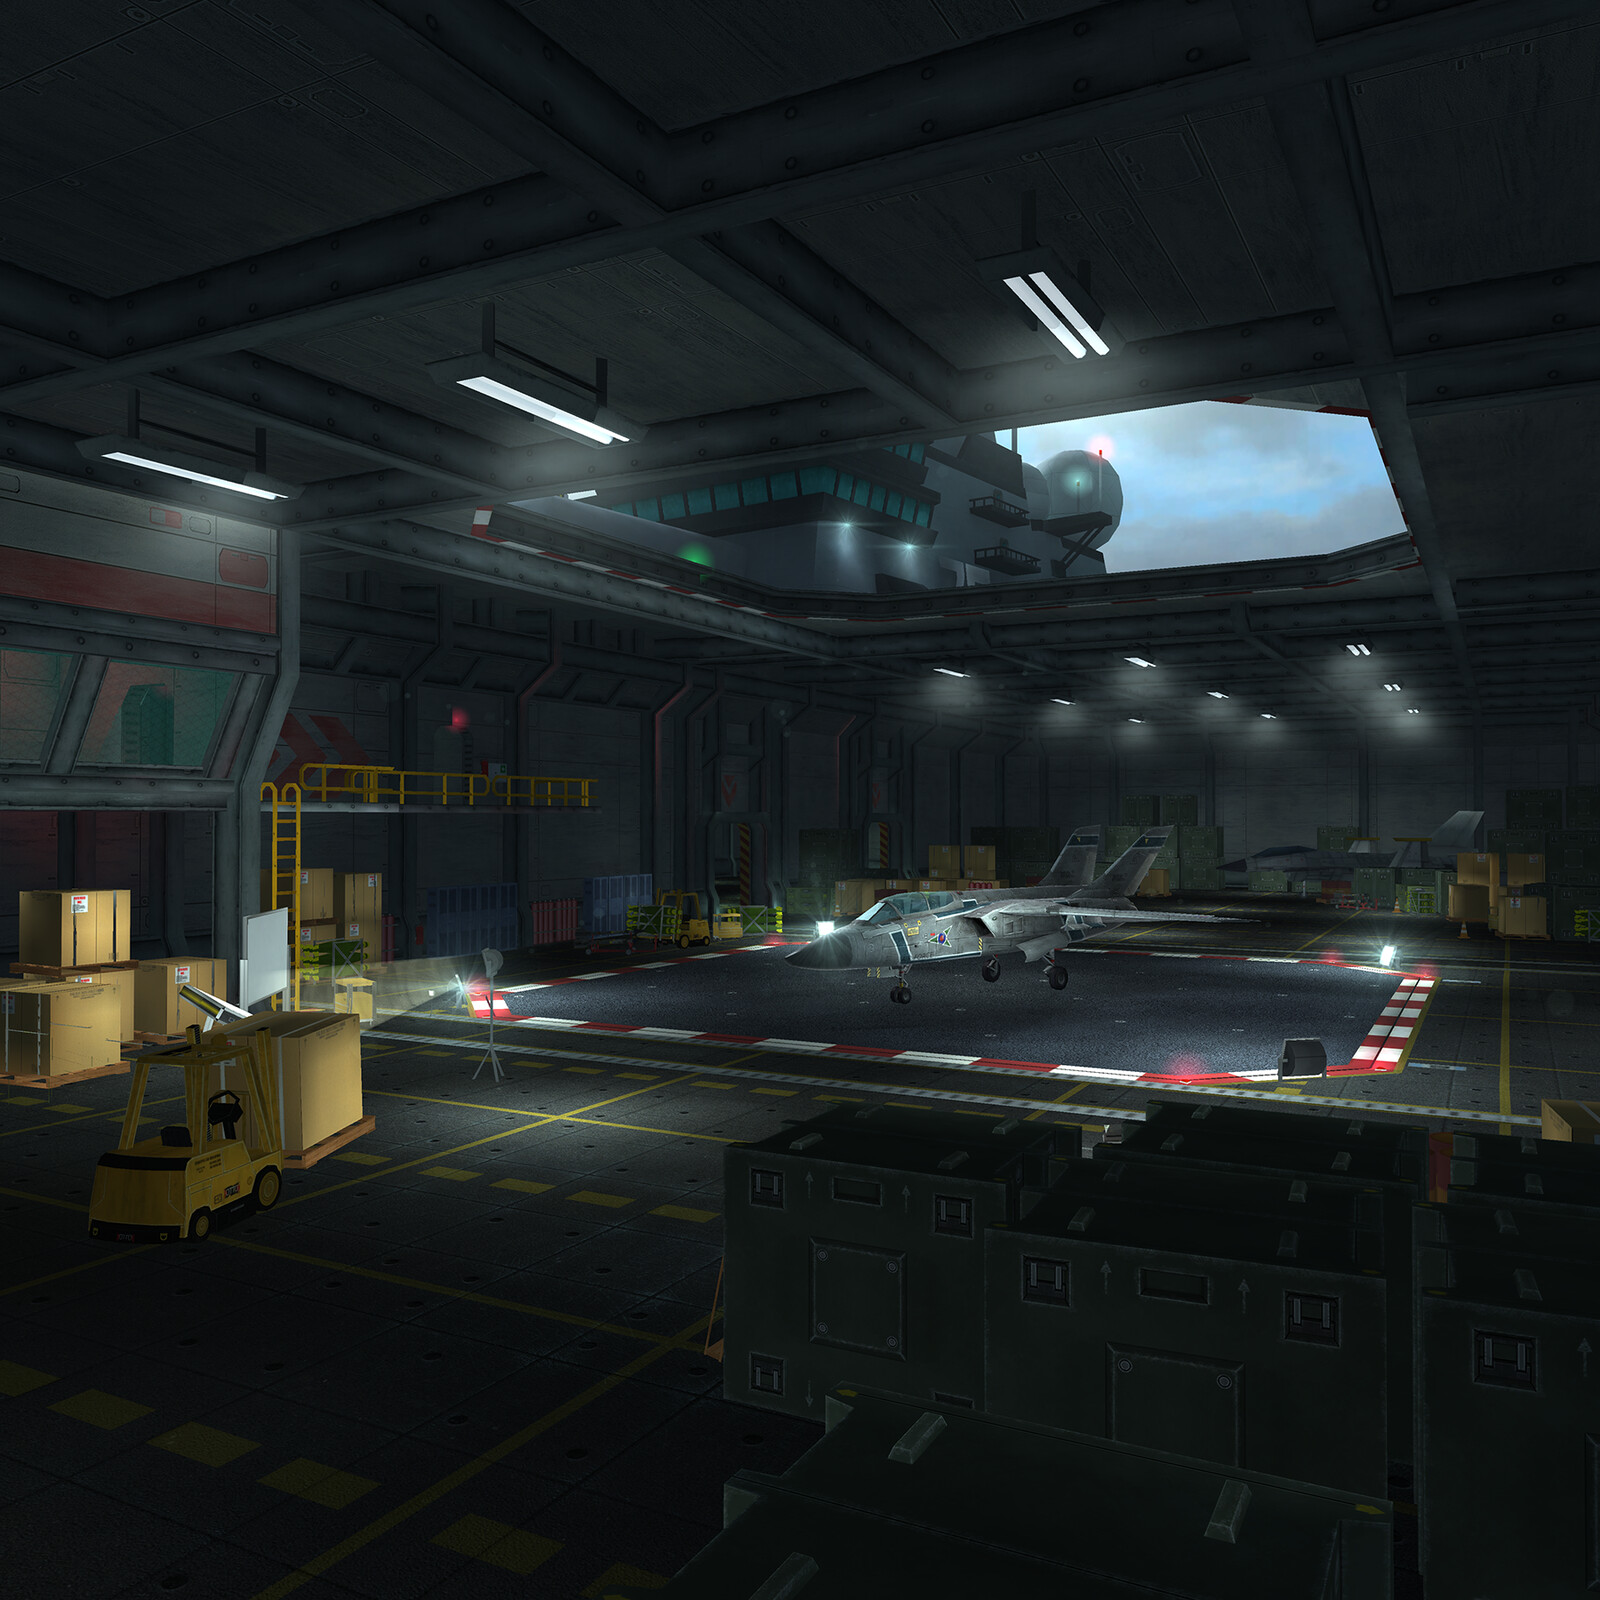 Aircraft Carrier plane selection. The elevator was used to load and unload planes into the scene for player aircraft select. Once selected the plane would rise seamlessly to top deck for takeoff. 